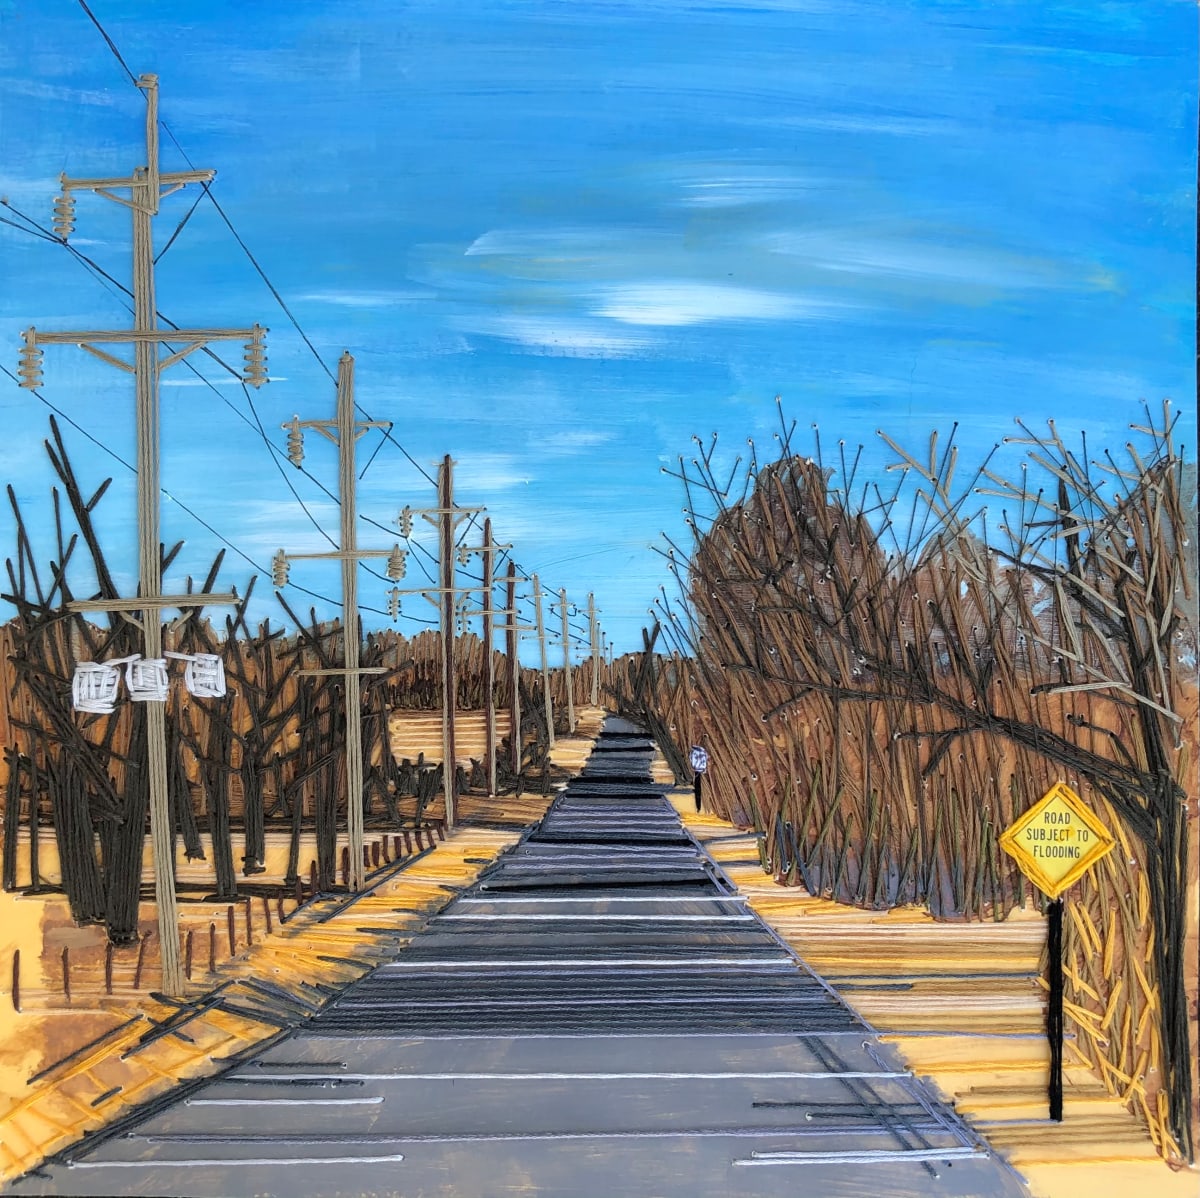 Road Subject To Flood by Irmgard Geul  Image: Road Subject To Flood